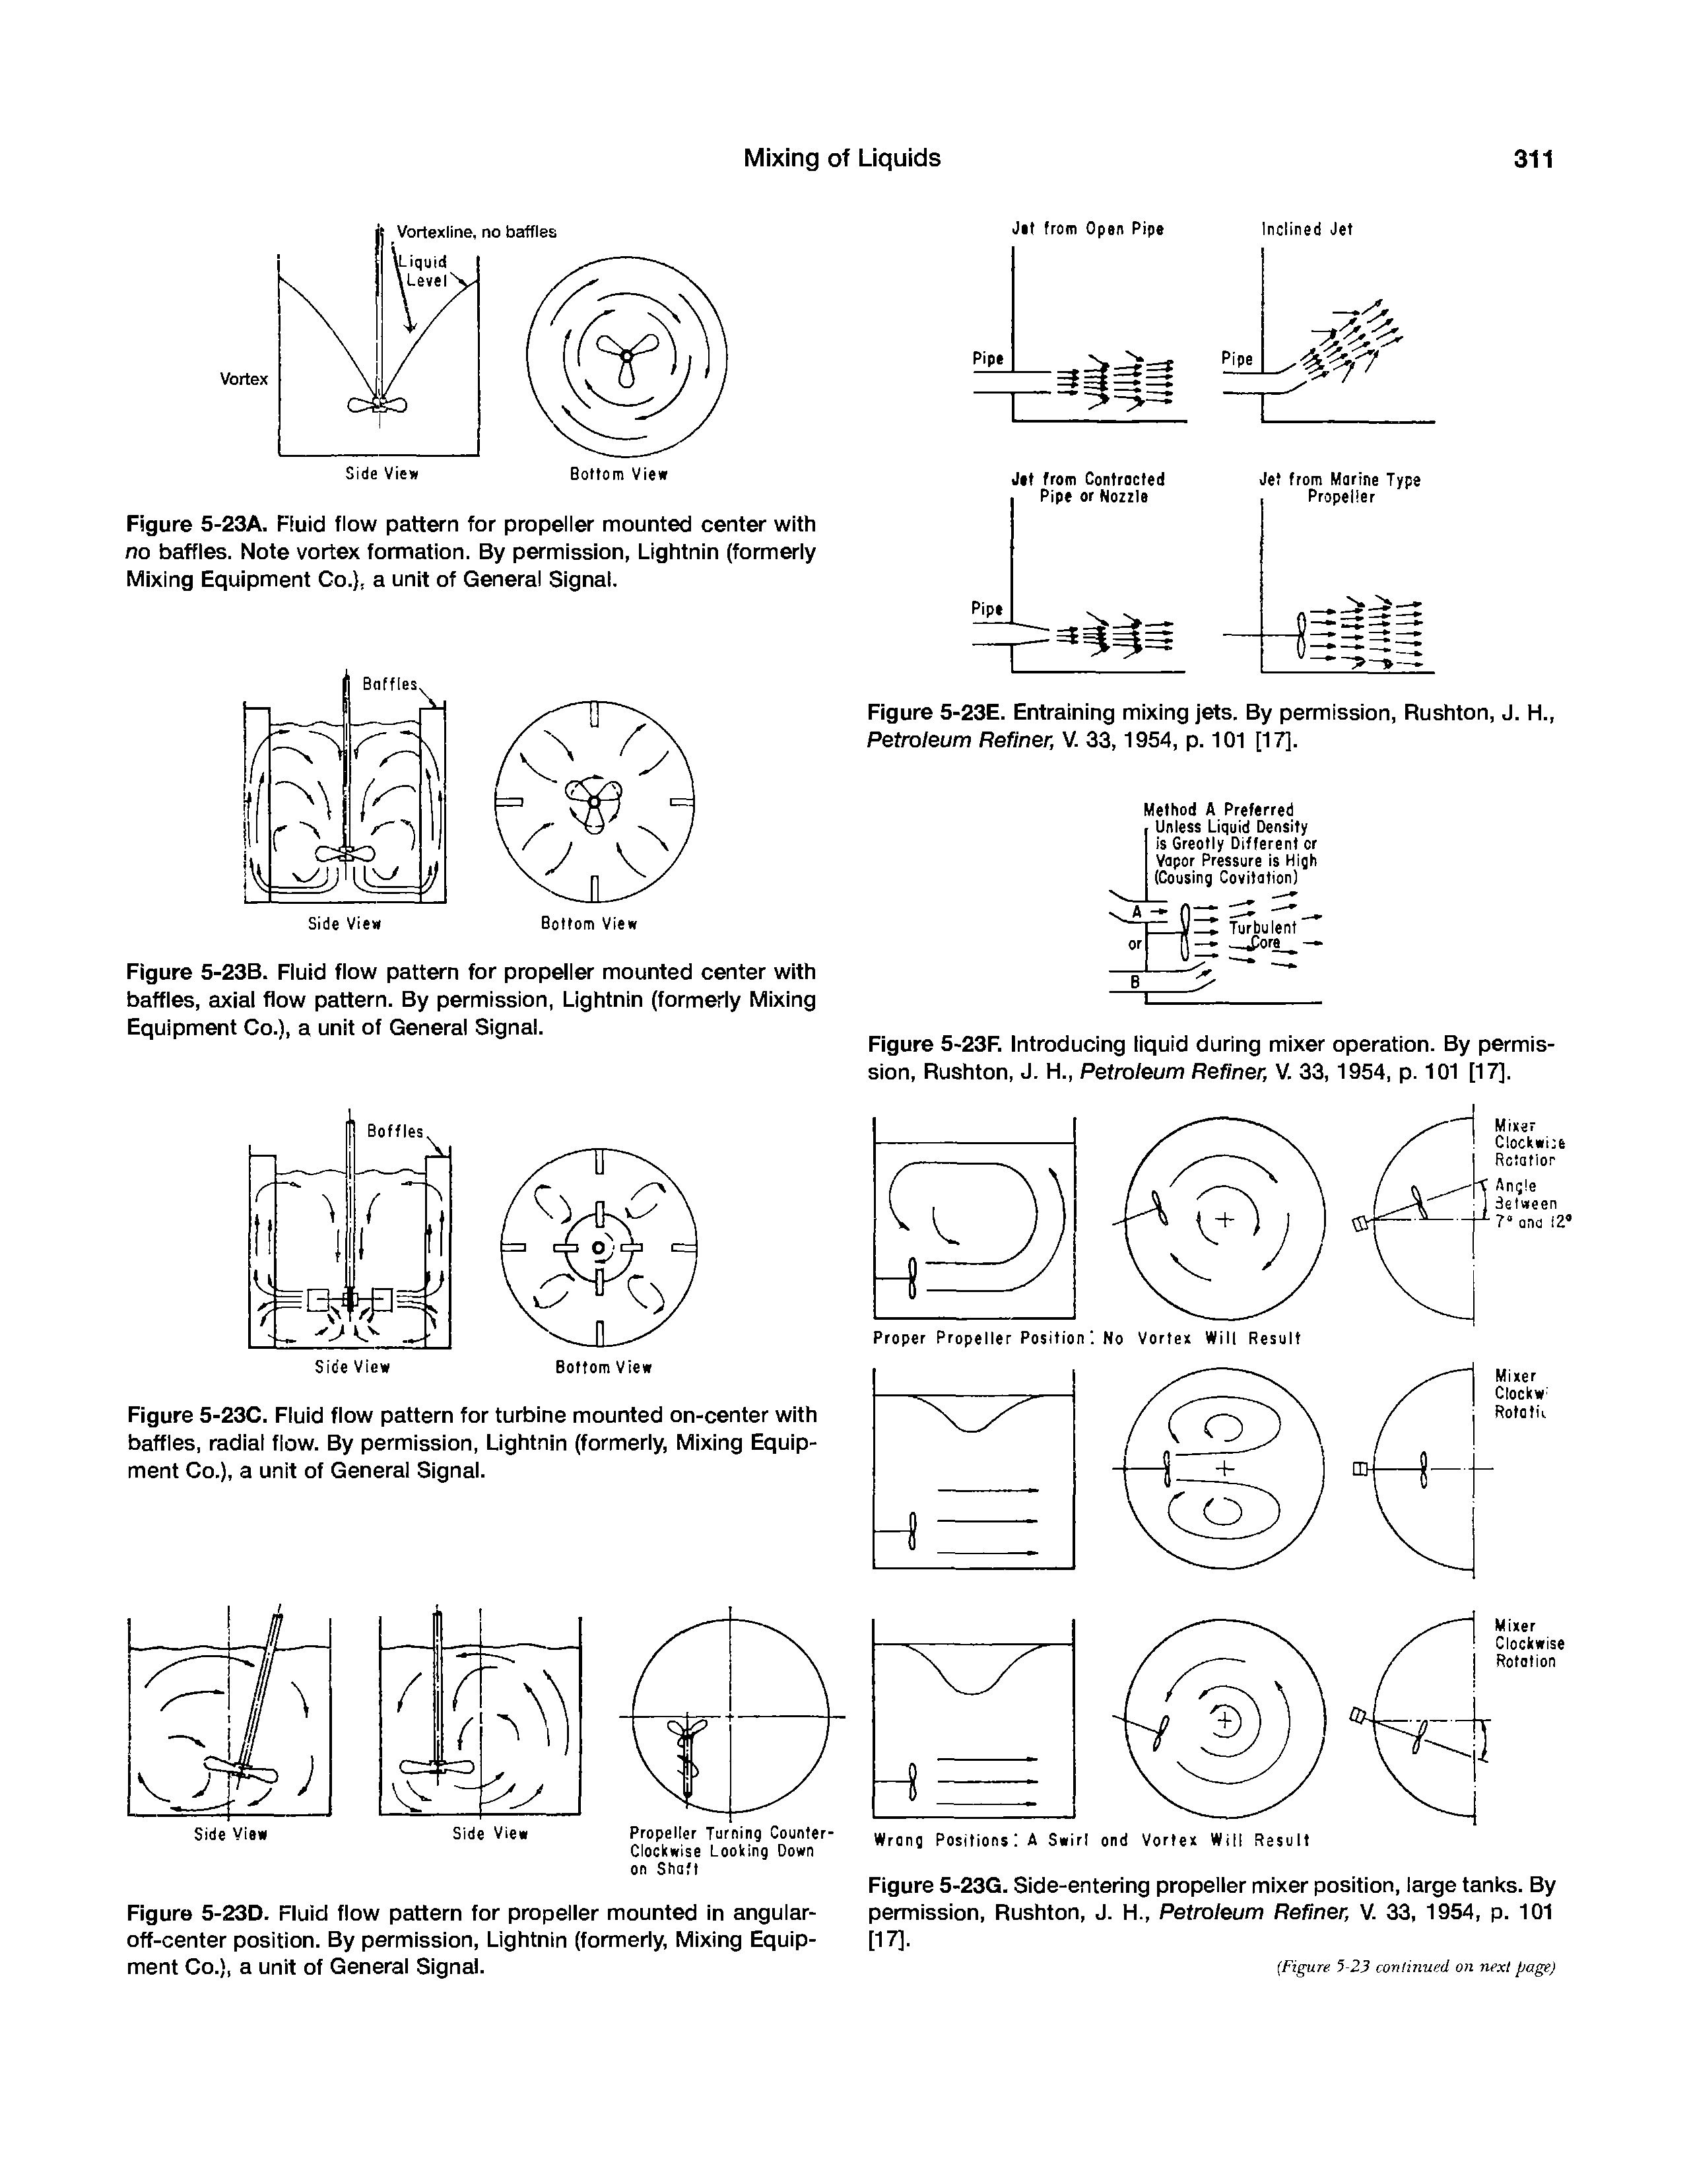 Figure 5-23B. Fluid flow pattern for propeller mounted center with baffles, axial flow pattern. By permission, LIghtnin (formerly Mixing Equipment Co.), a unit of General Signal.